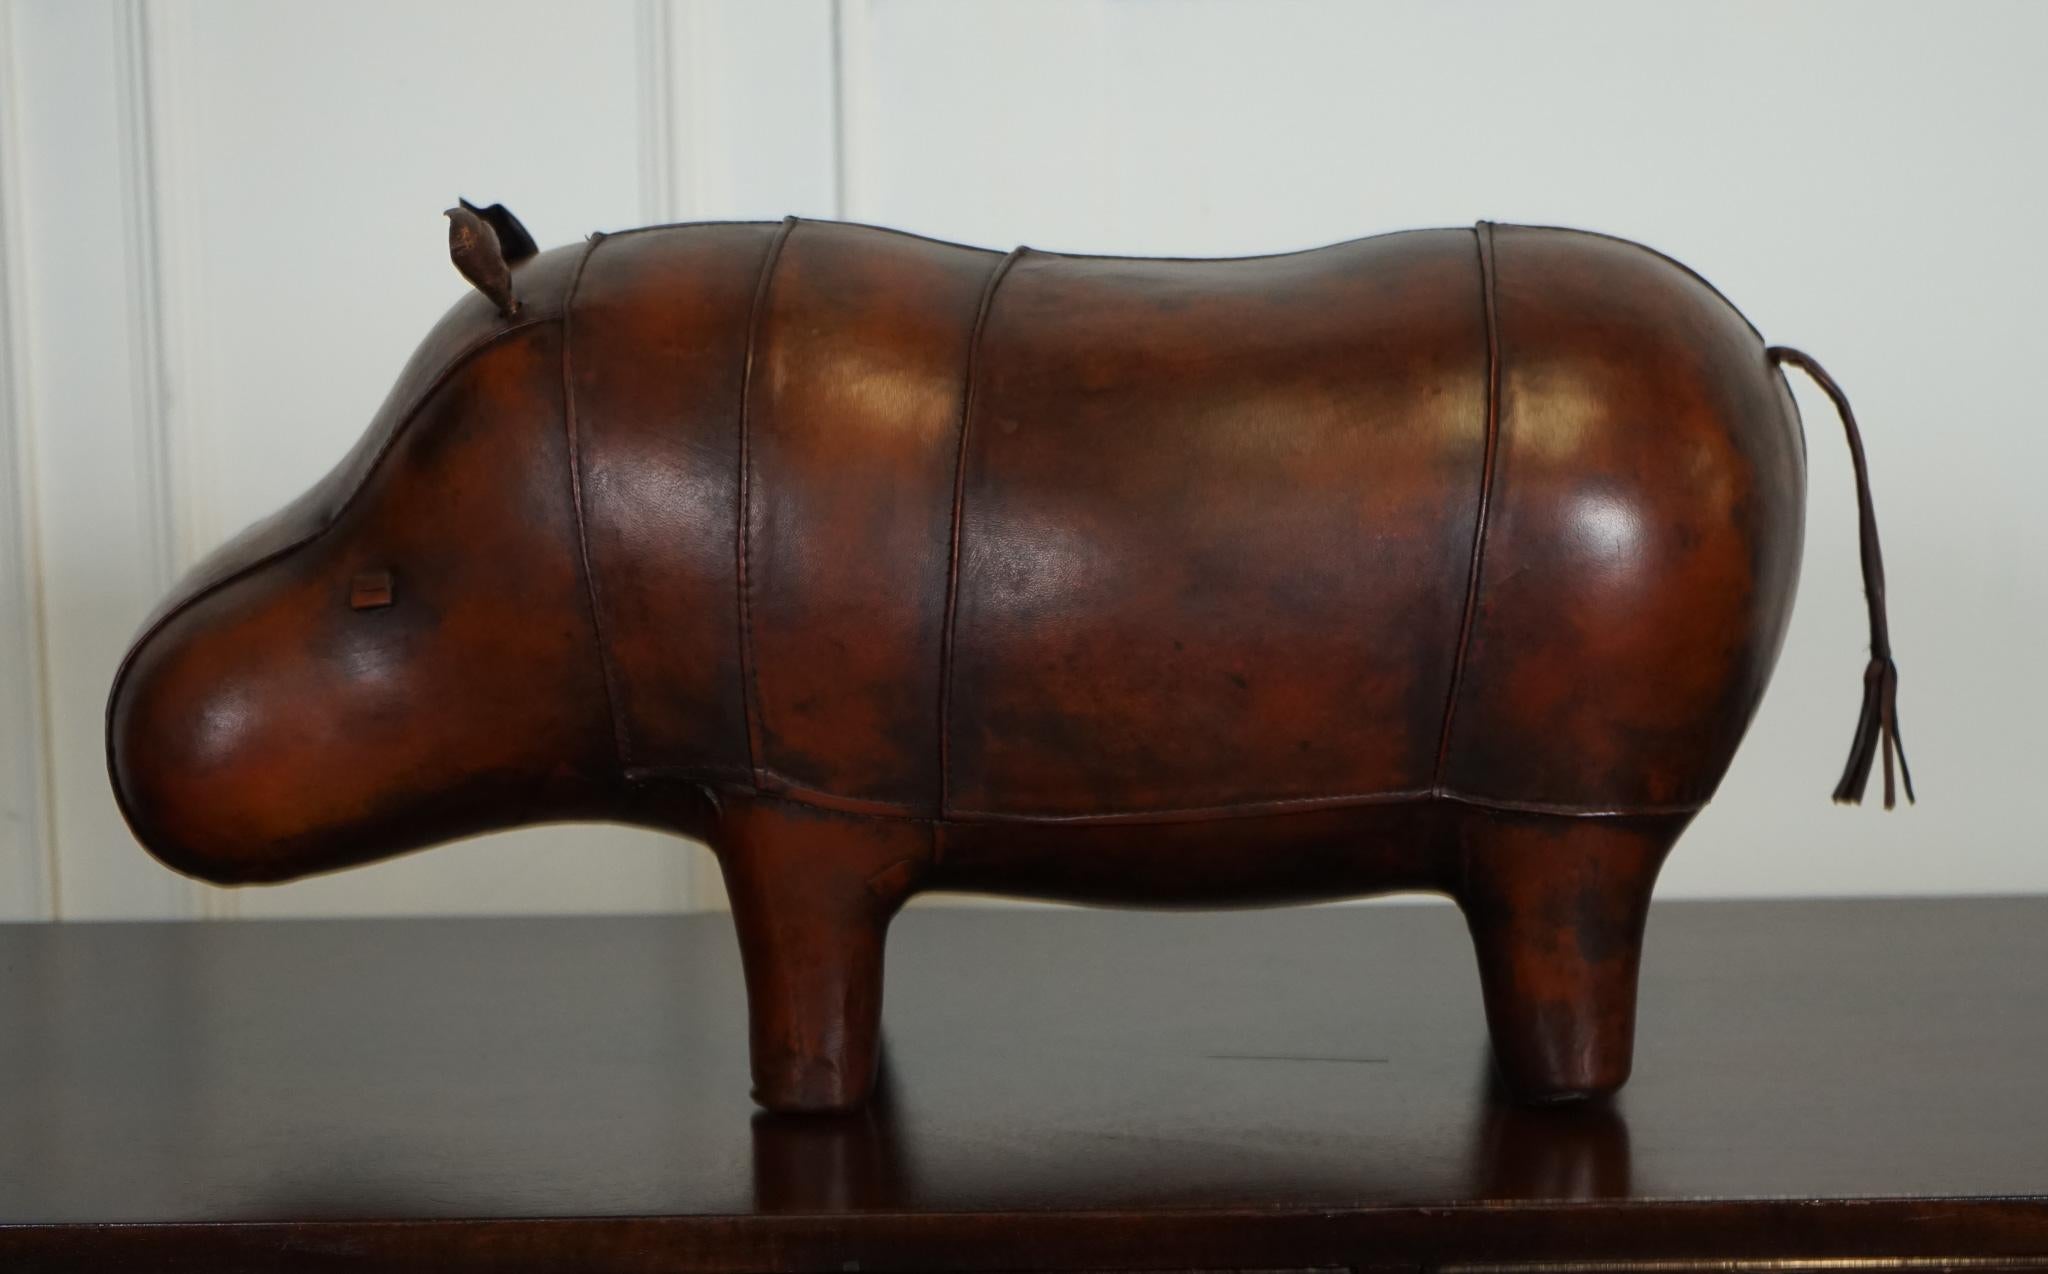 LIBERTY LONDON STYLE OMERSA ANTIQUE BROWN LEATHER FOOTSTOOL HiPPO In Good Condition For Sale In Pulborough, GB